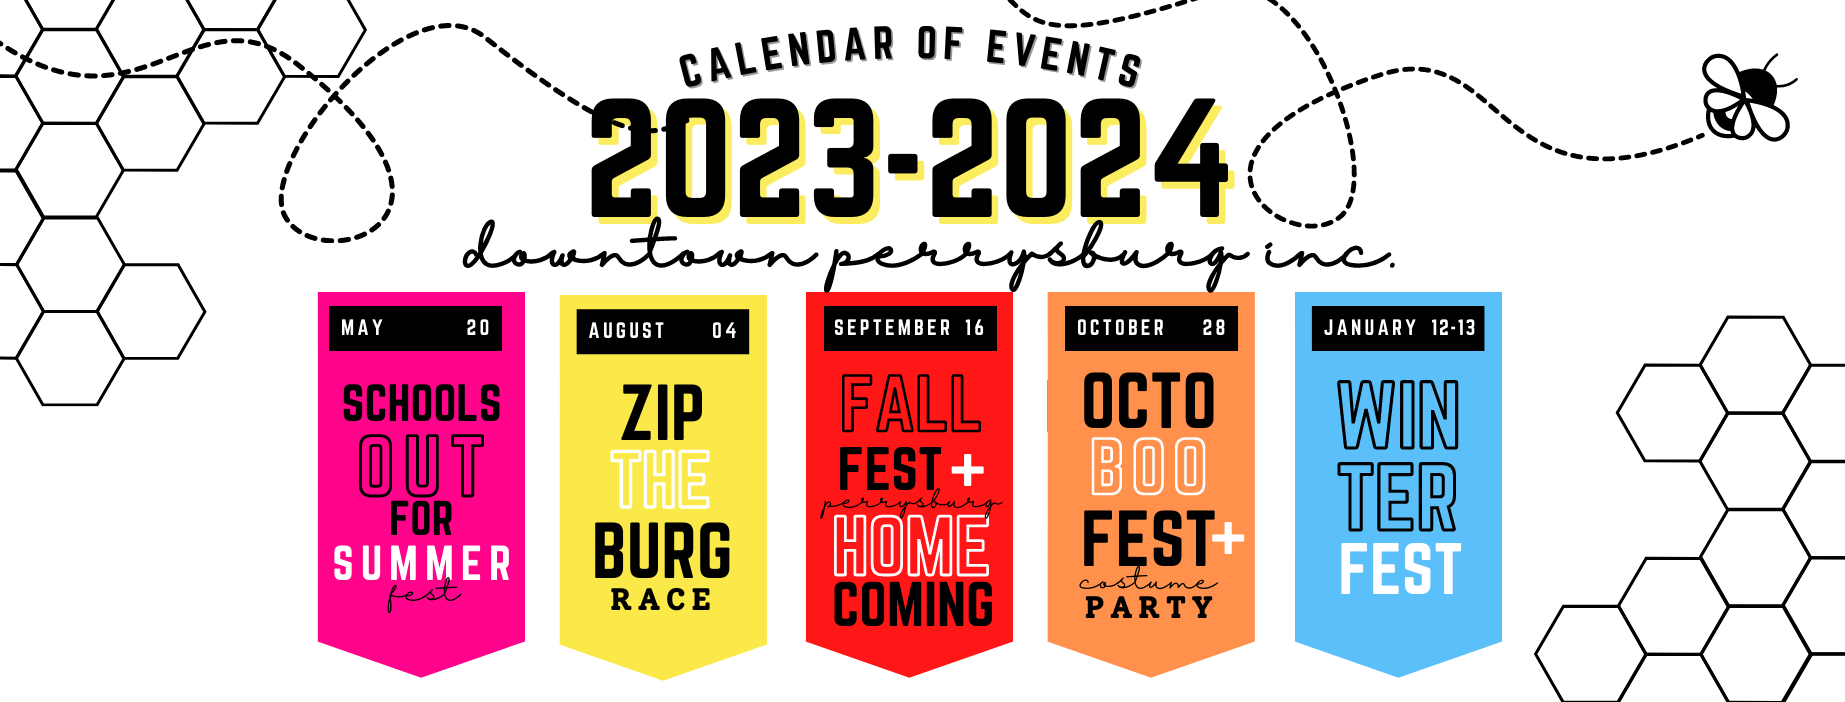 Events Downtown Perrysburg, Inc.